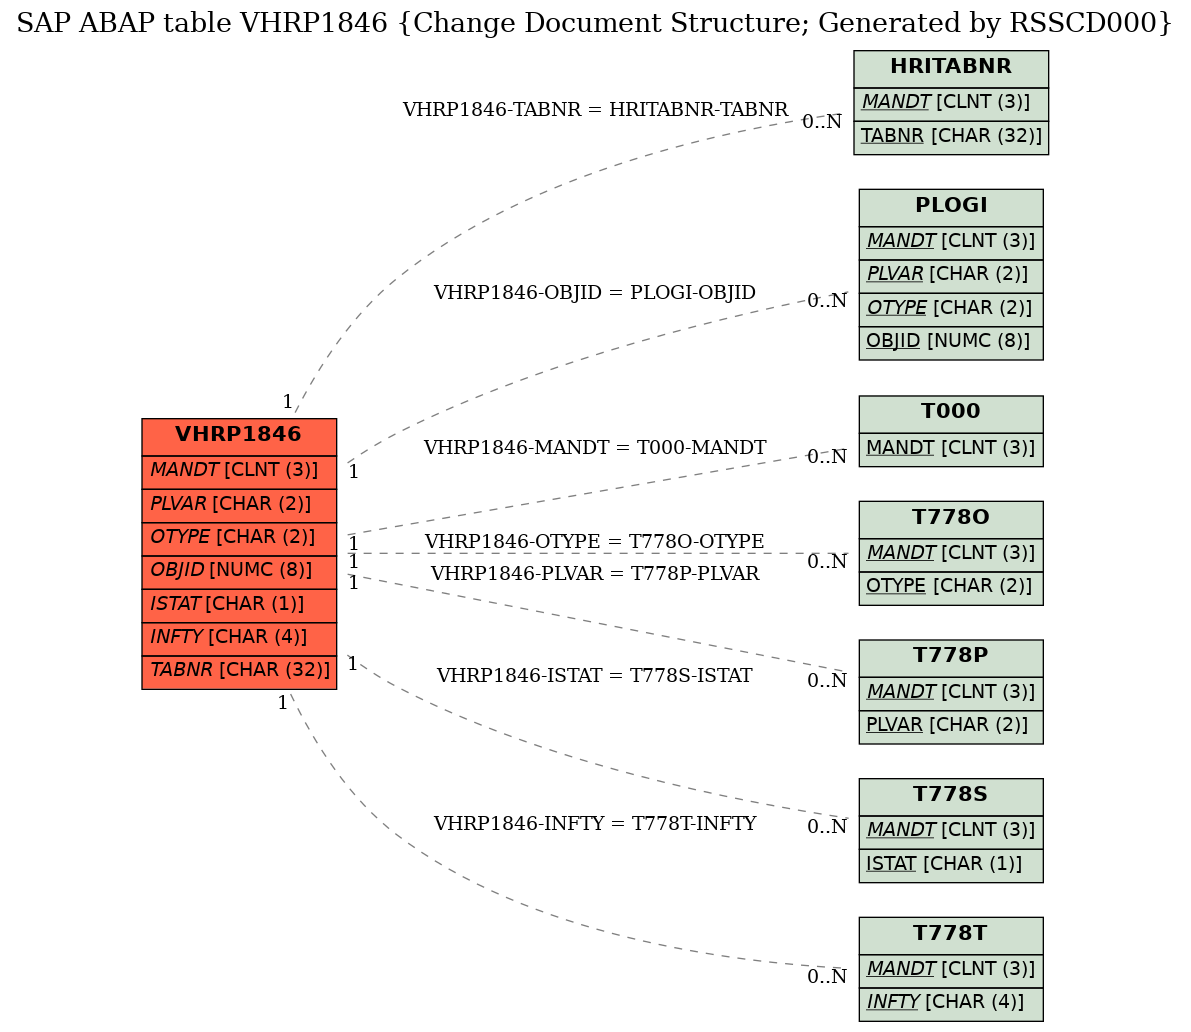 E-R Diagram for table VHRP1846 (Change Document Structure; Generated by RSSCD000)